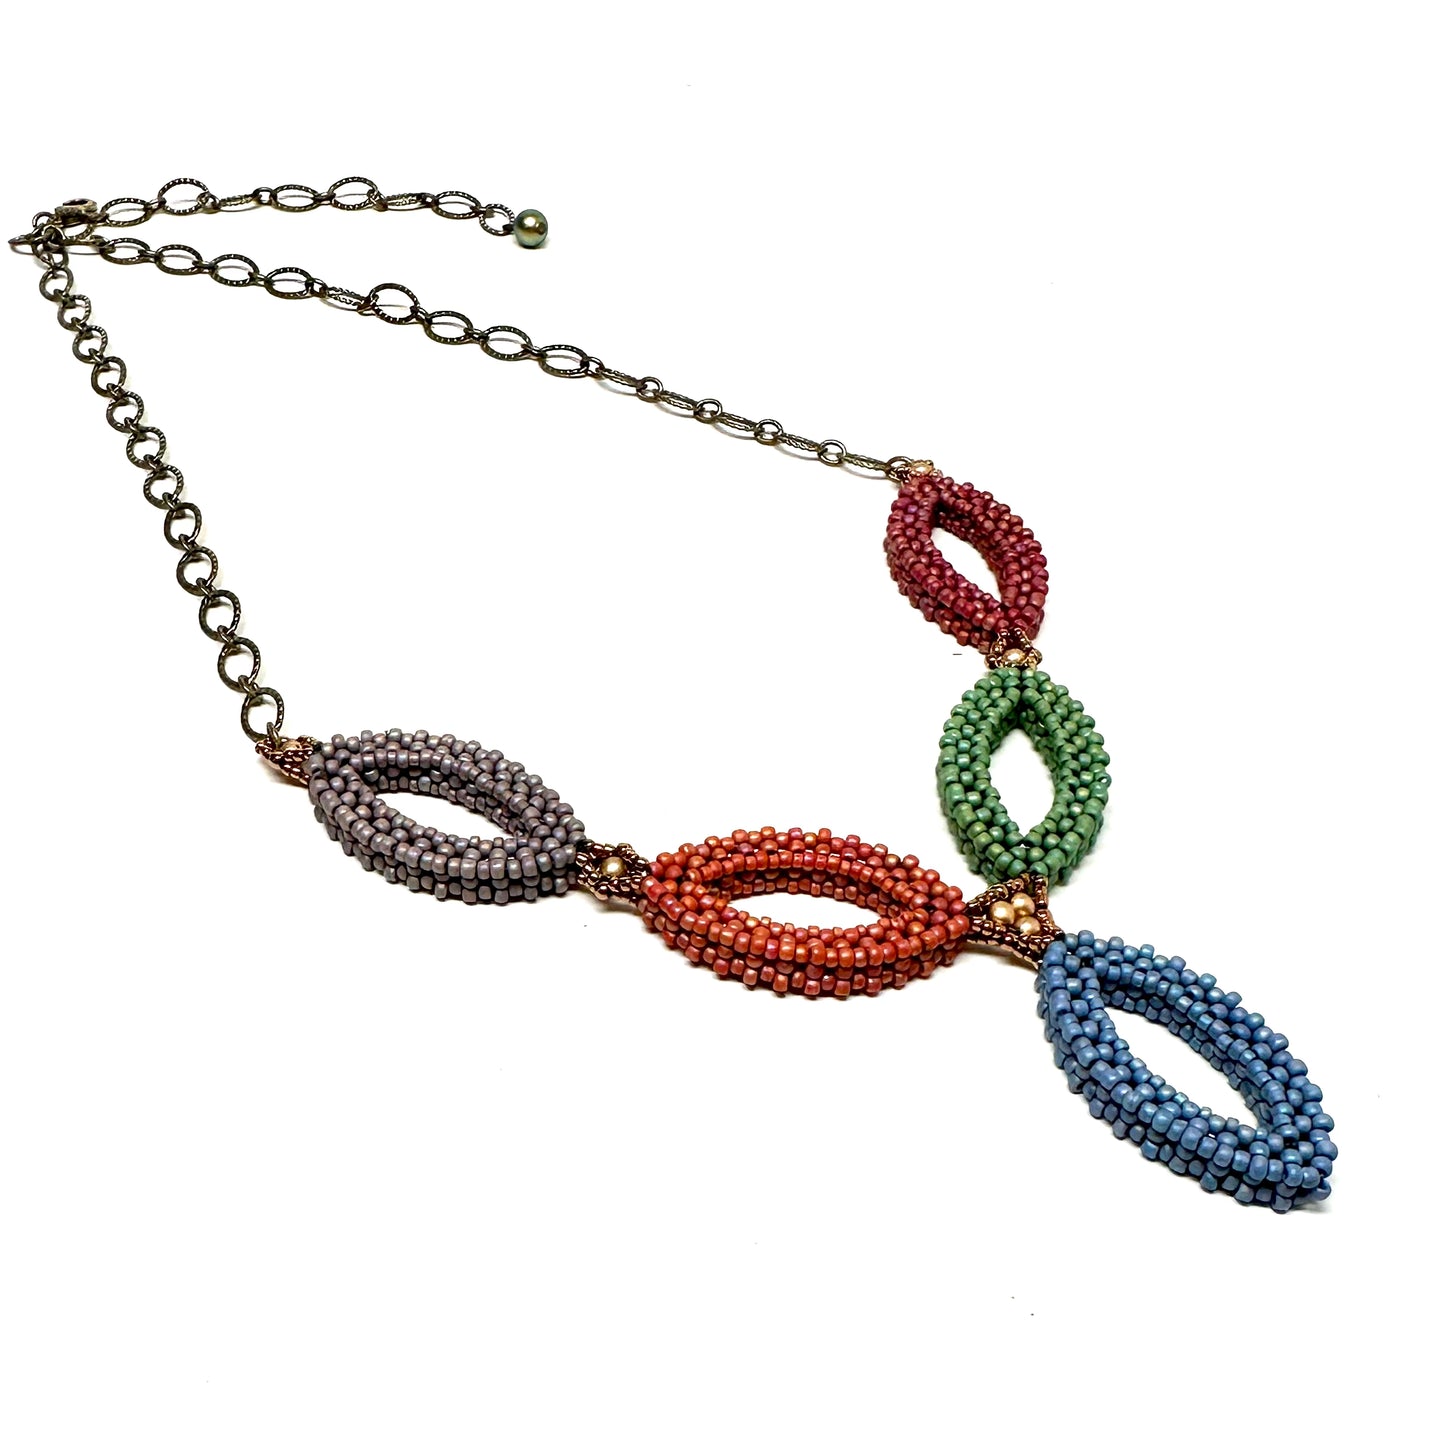 Hojas Necklace - 5 Multi Colored Leaves